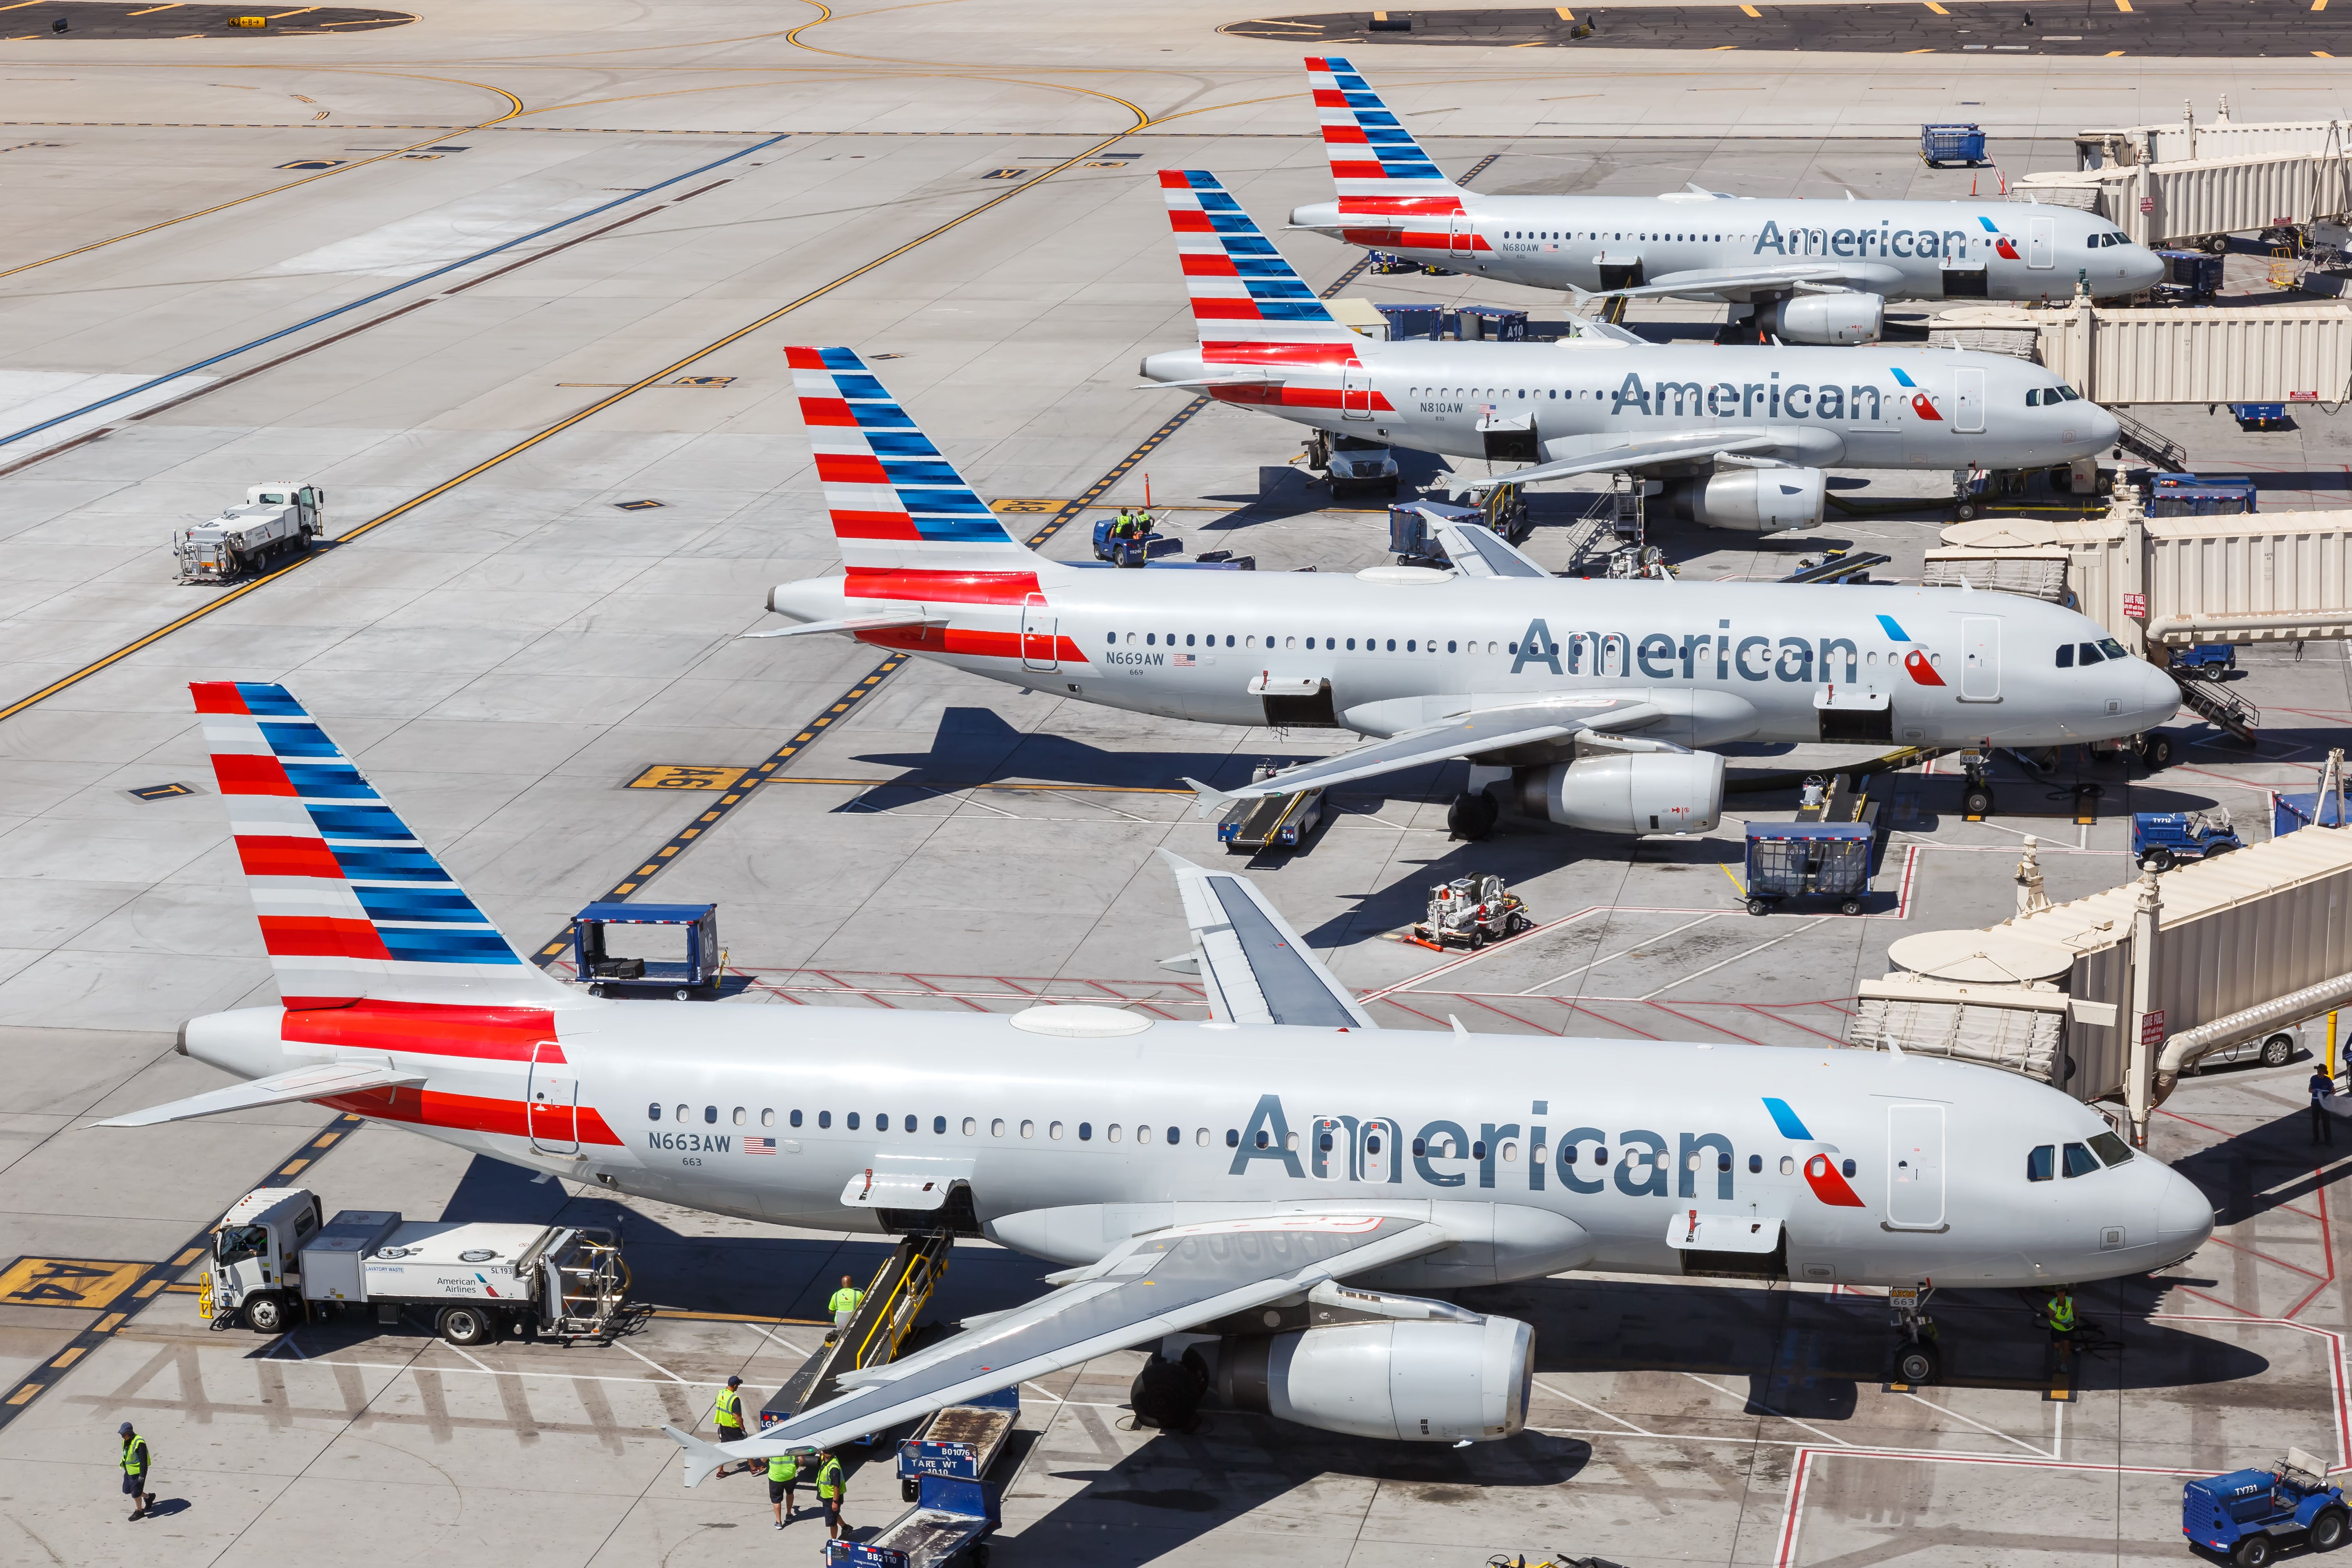 Several American Airlines aircraft 